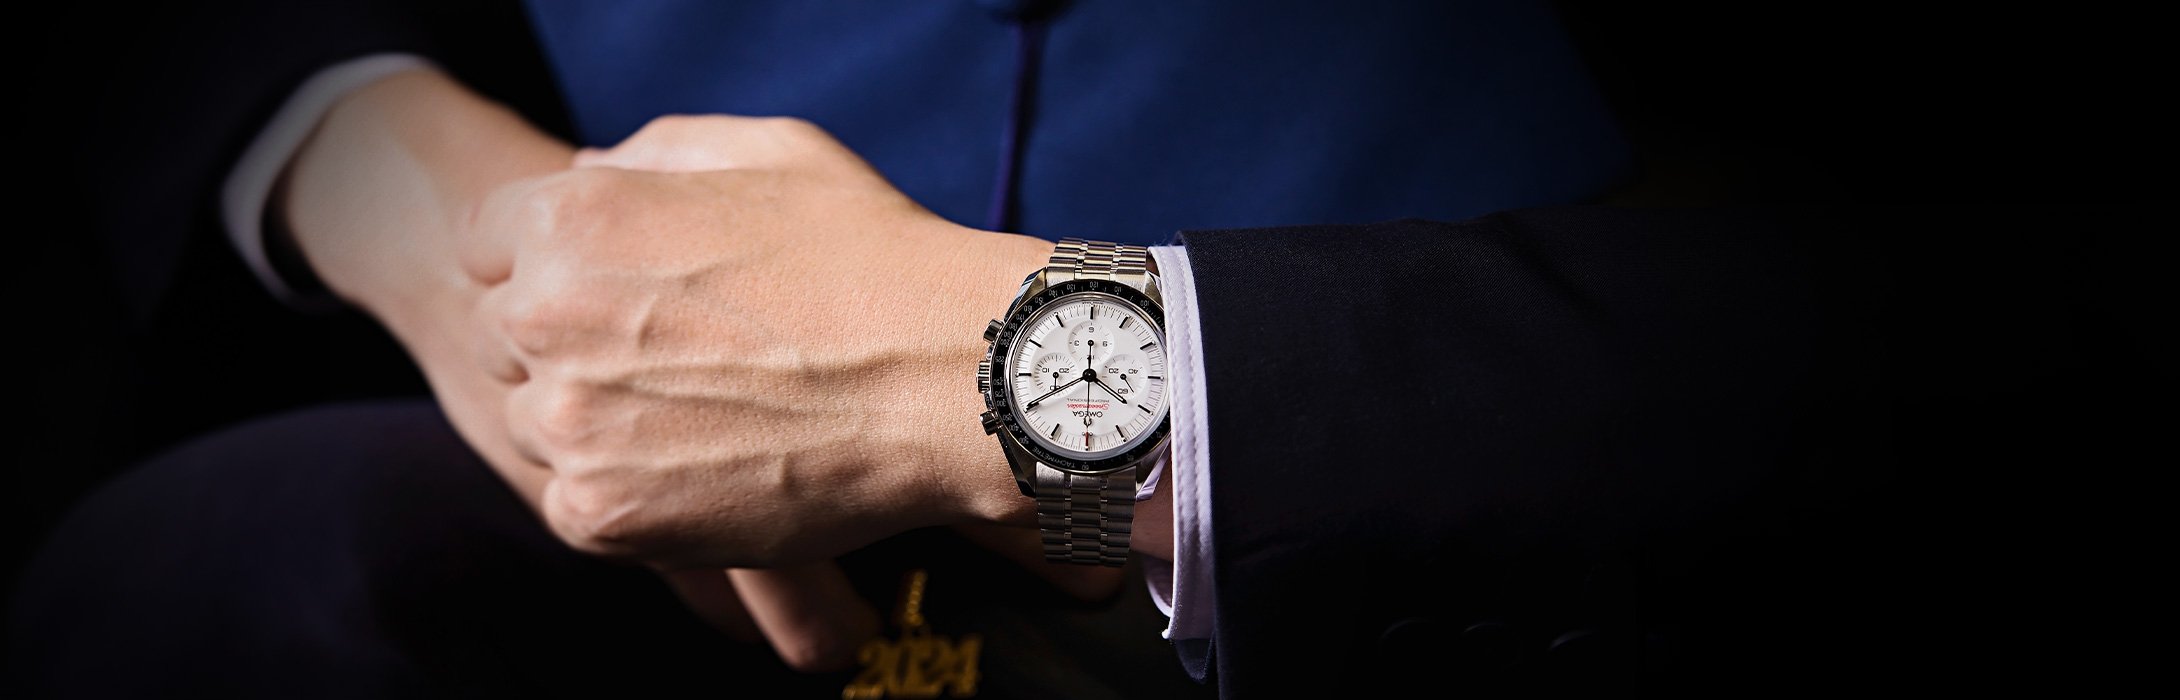 Graduation Watch: How to Pick The Perfect Timepiece